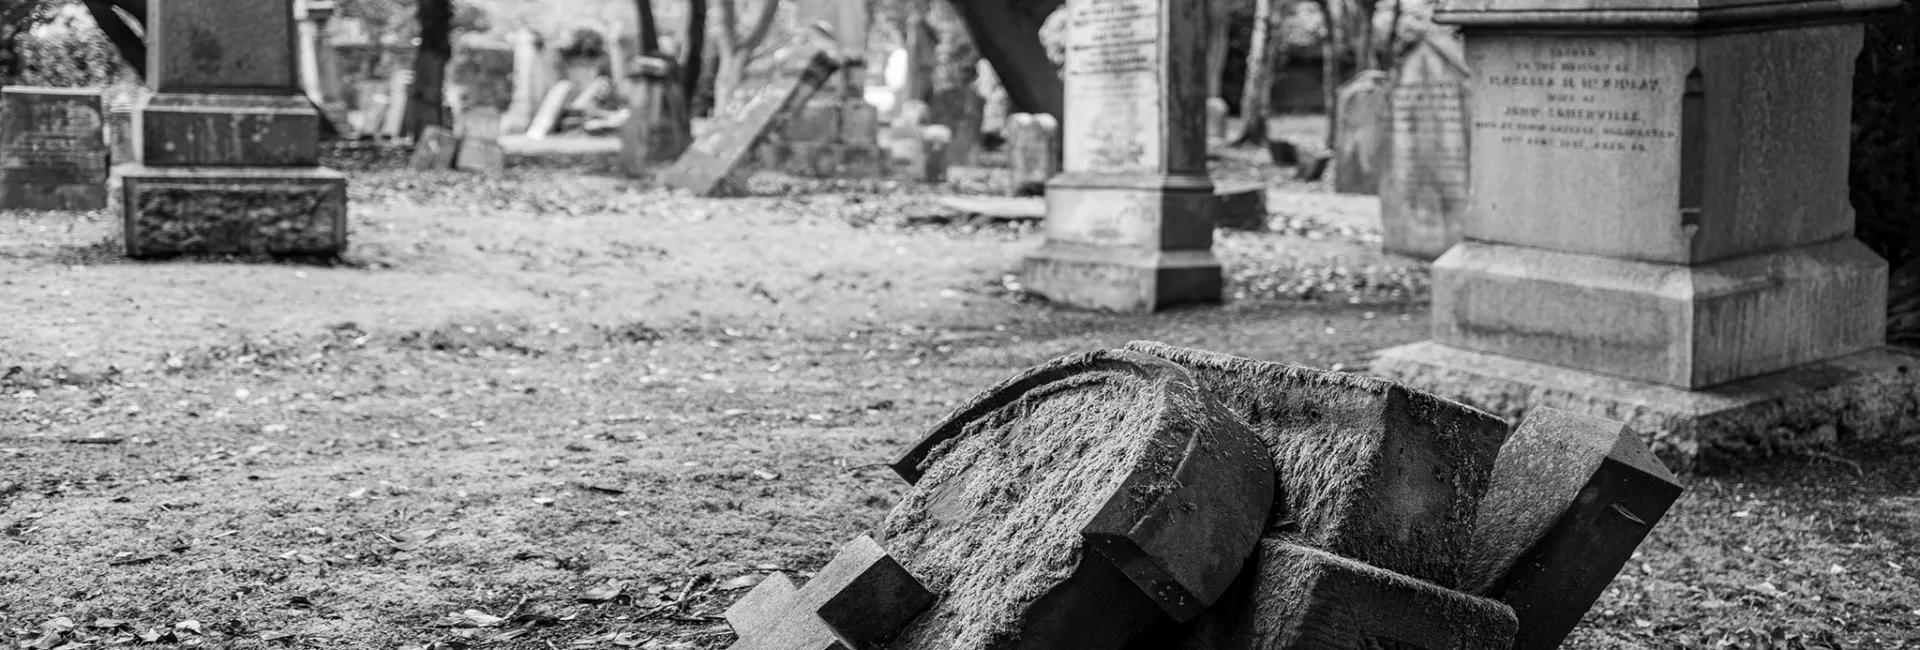 Old European Cemetery in Black and White